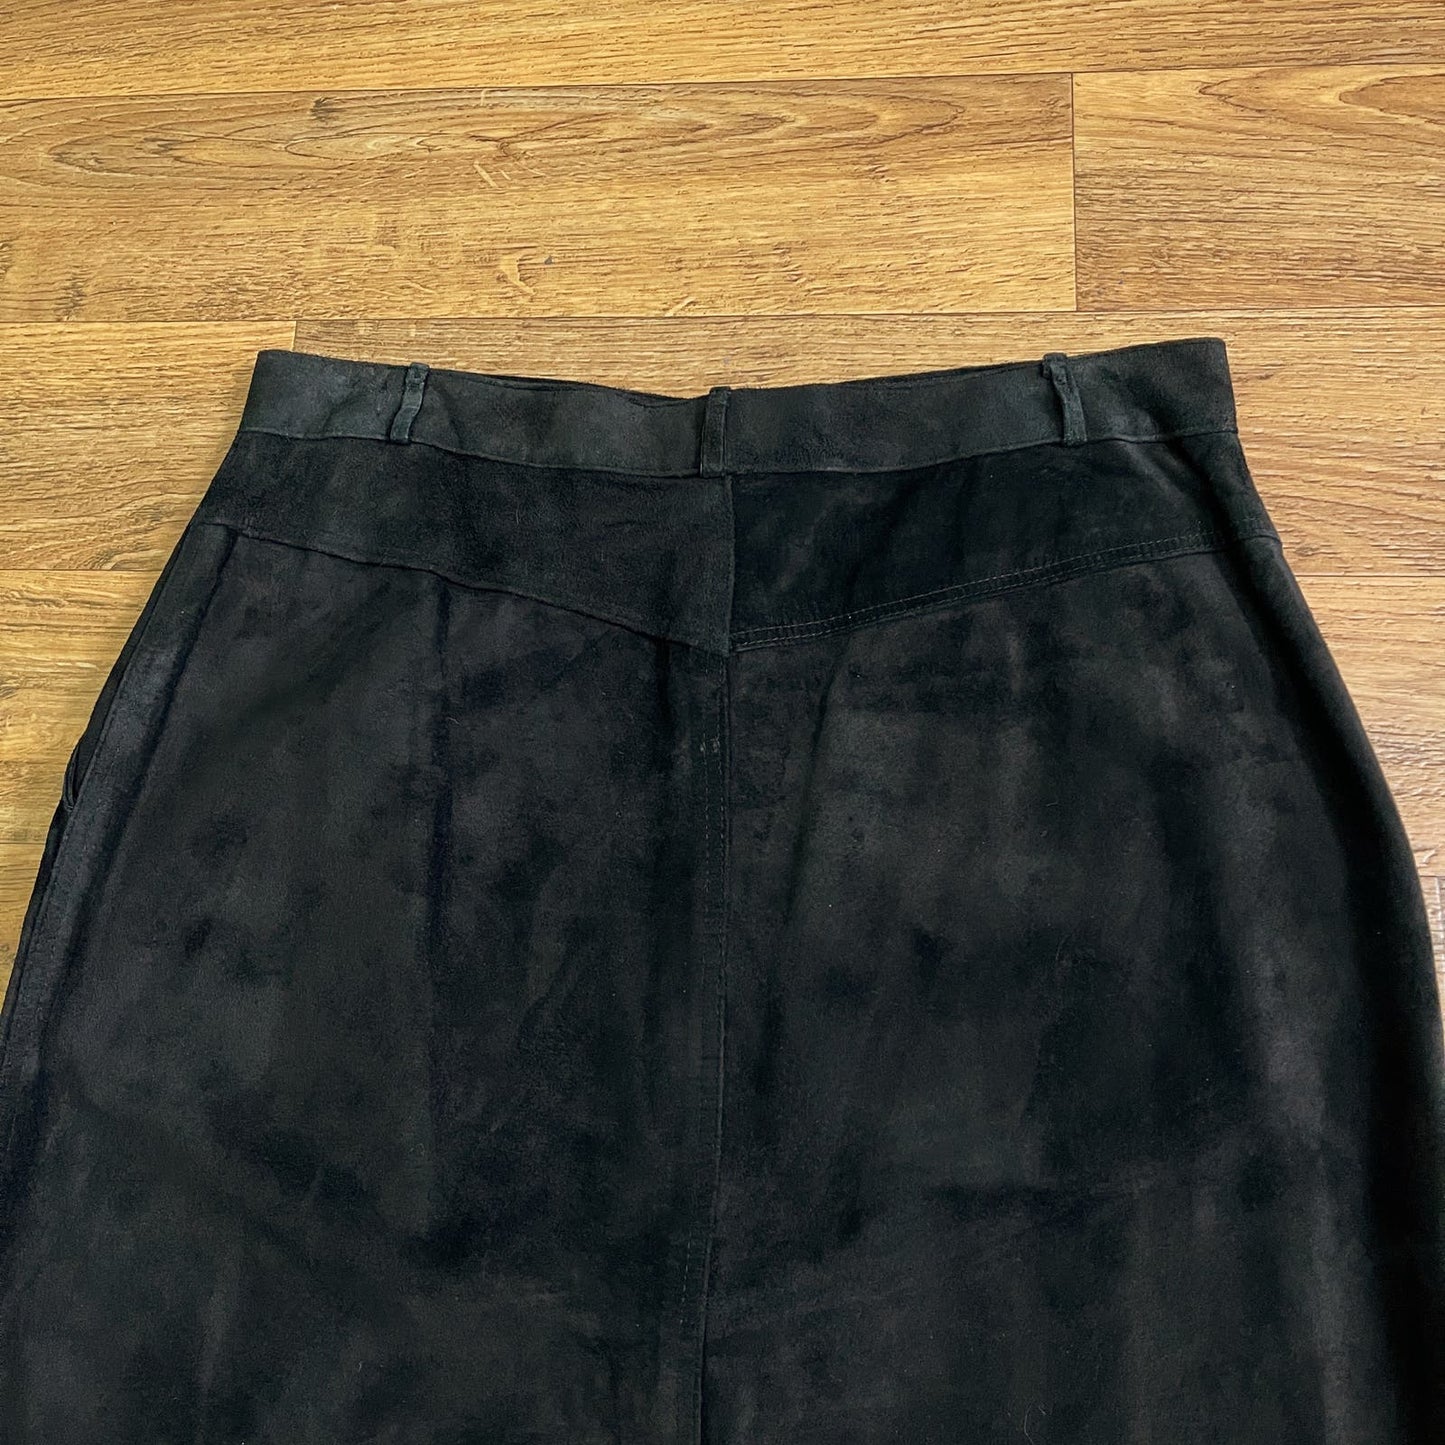 Lord and Taylor 90s Black Suede Leather Midi Skirt Pencil Goth Career Vintage 14